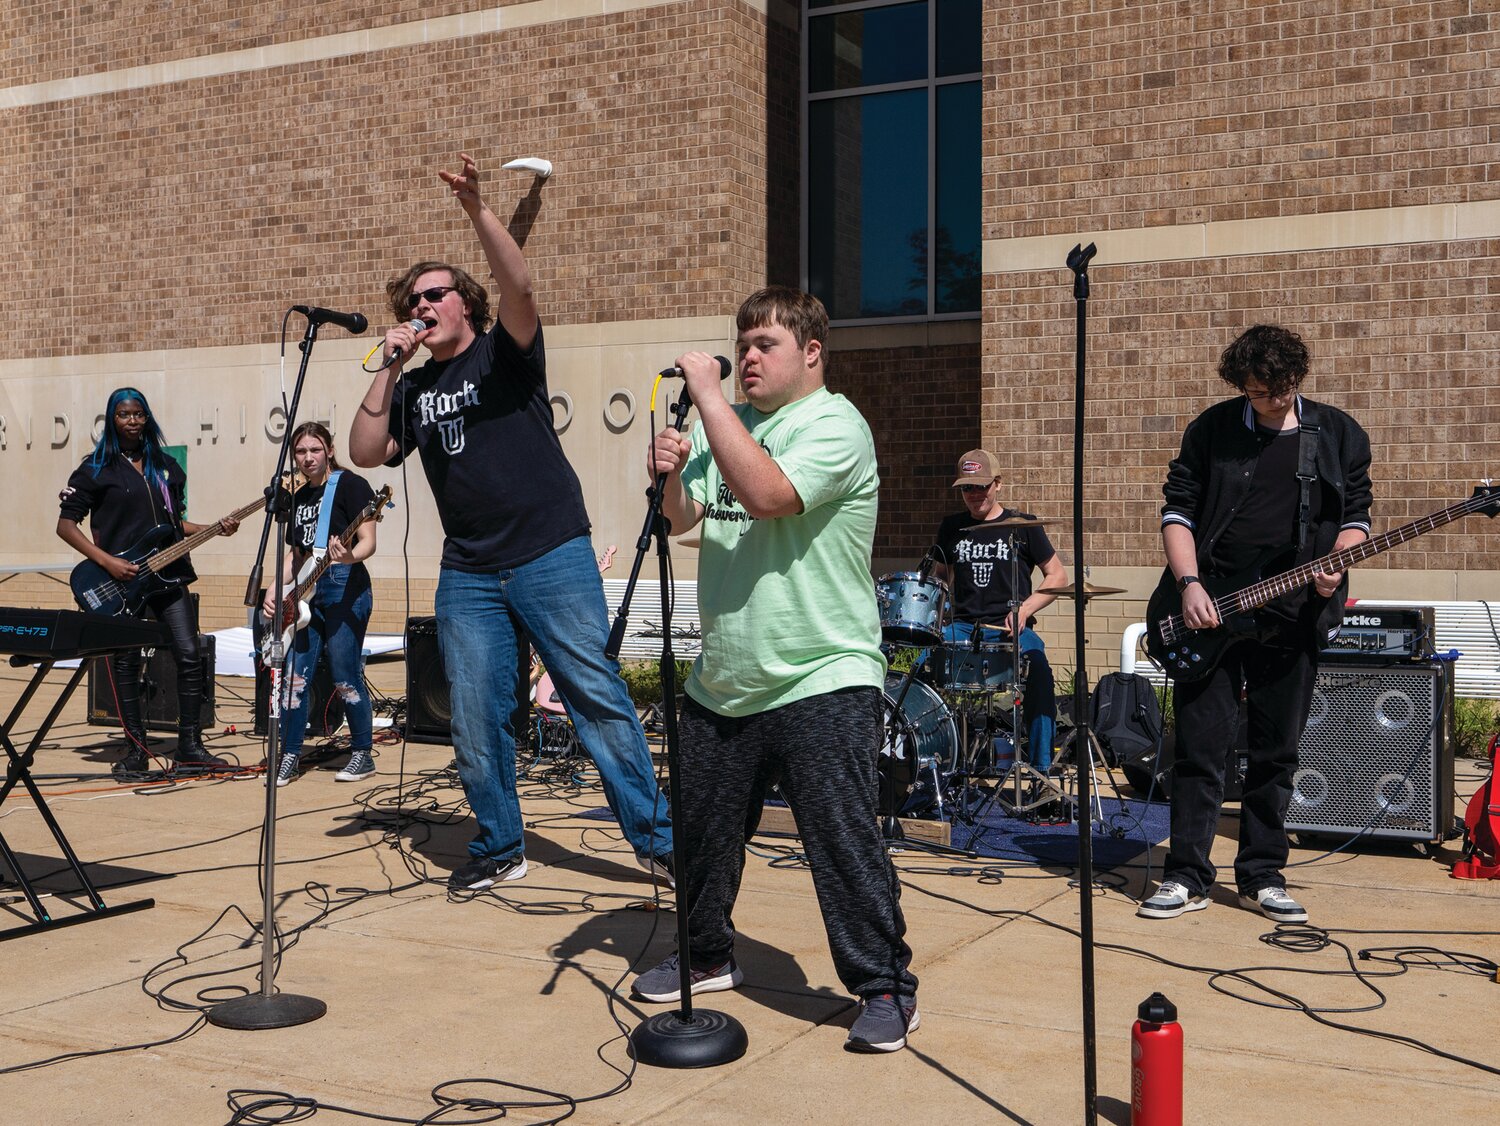 Students rock out at April Showers, an event hosted by the Unified Pennridge Club, a group that provides opportunities for those with and without disabilities to participate together in club activities and sports.